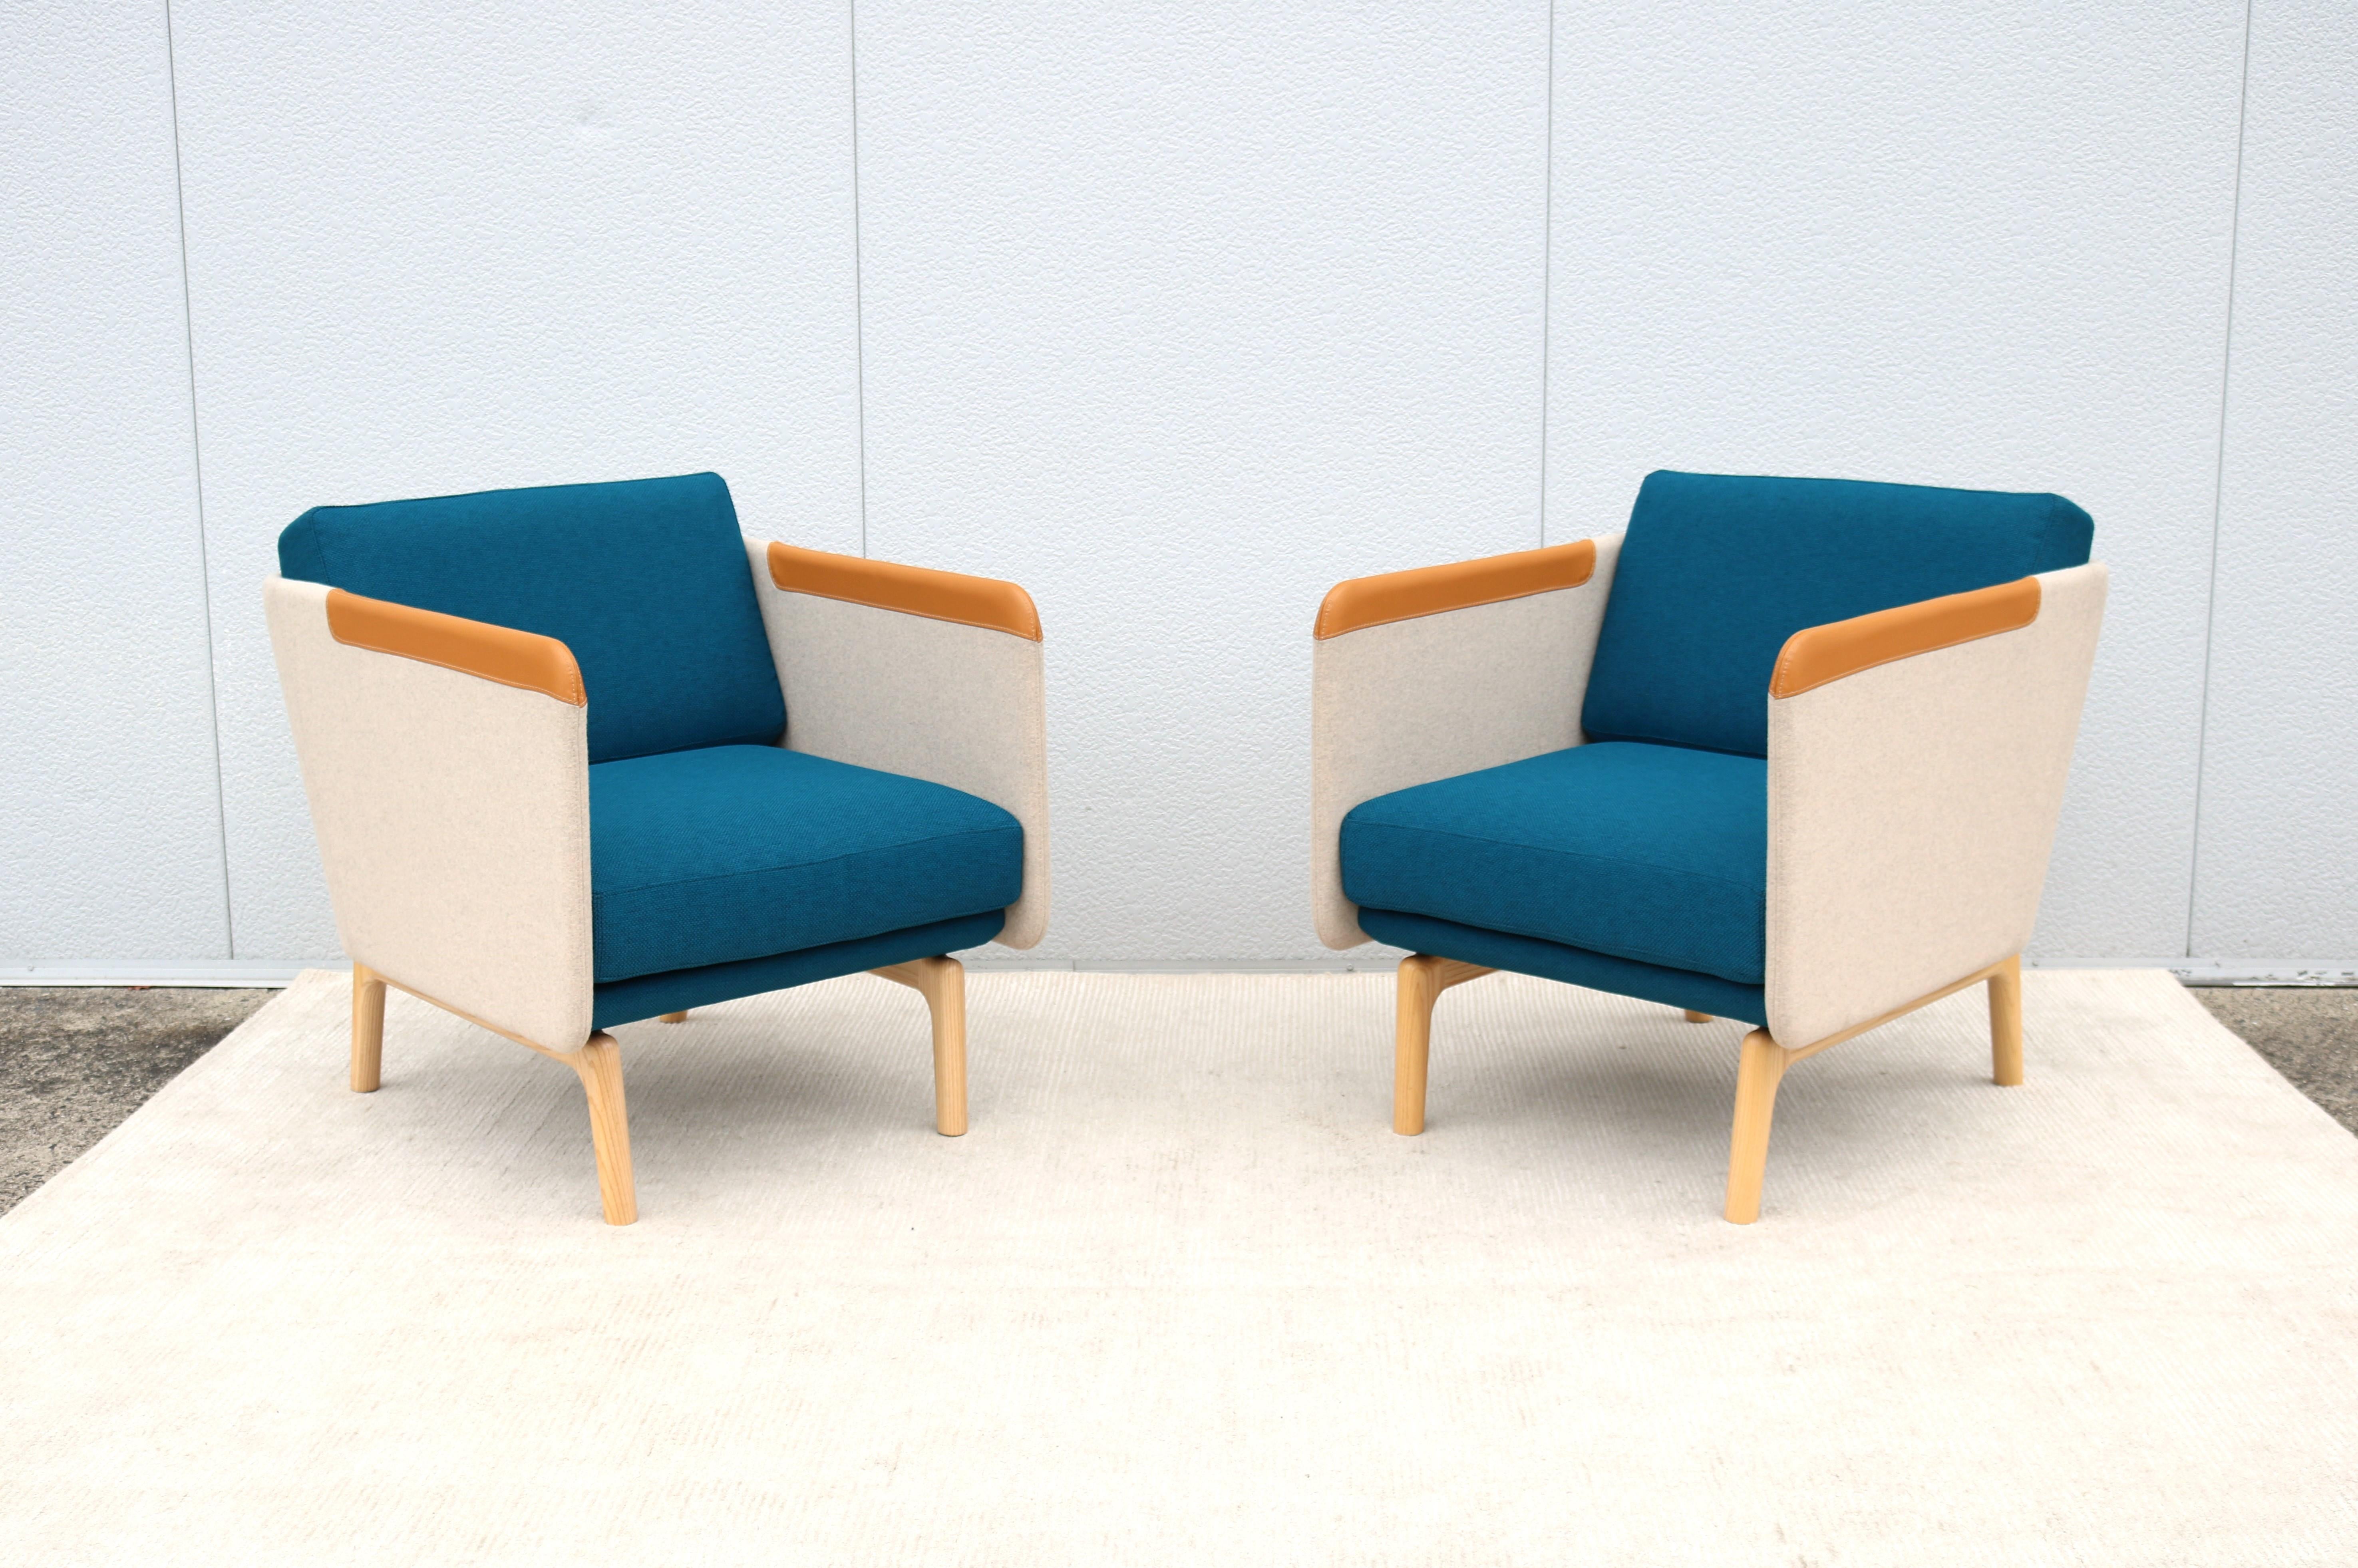 Add a touch of sophistication to your home or office with this fabulous pair of Heya lounge chairs.
Designed by Roger Webb for OFS to be comfortable and supportive. In Japanese, Heya means (small room) 
These chairs are made of high-quality